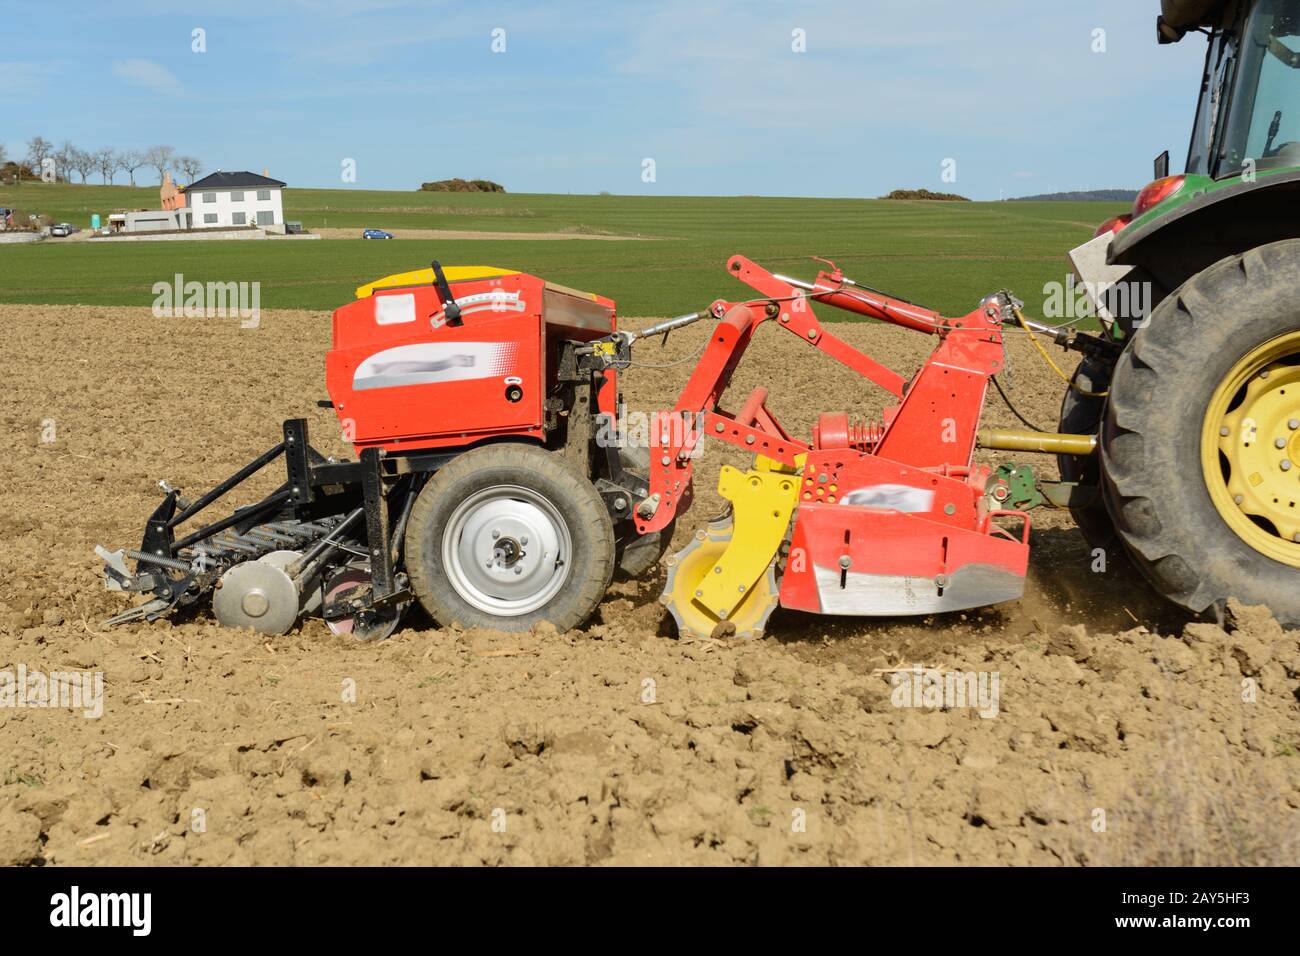 Sowing machine for grain cultivation in the field Stock Photo